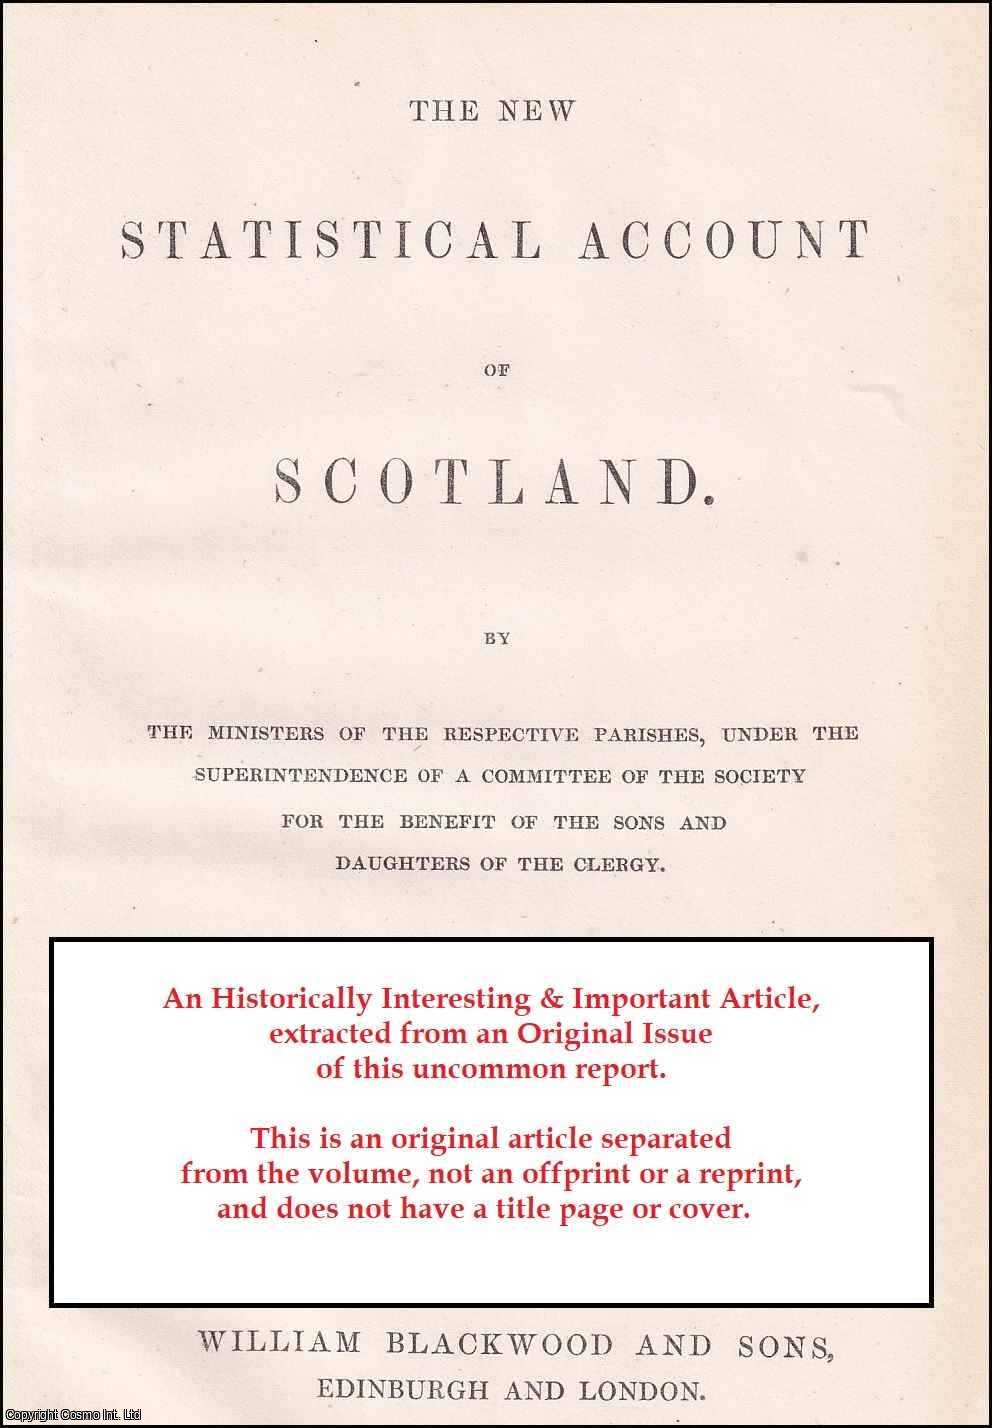 Rev. John Macdonald - Parish of Alvie. Presbytery of Abernethy, Synod of Moray. An uncommon original article from The New Statistical Account of Scotland, 1845.